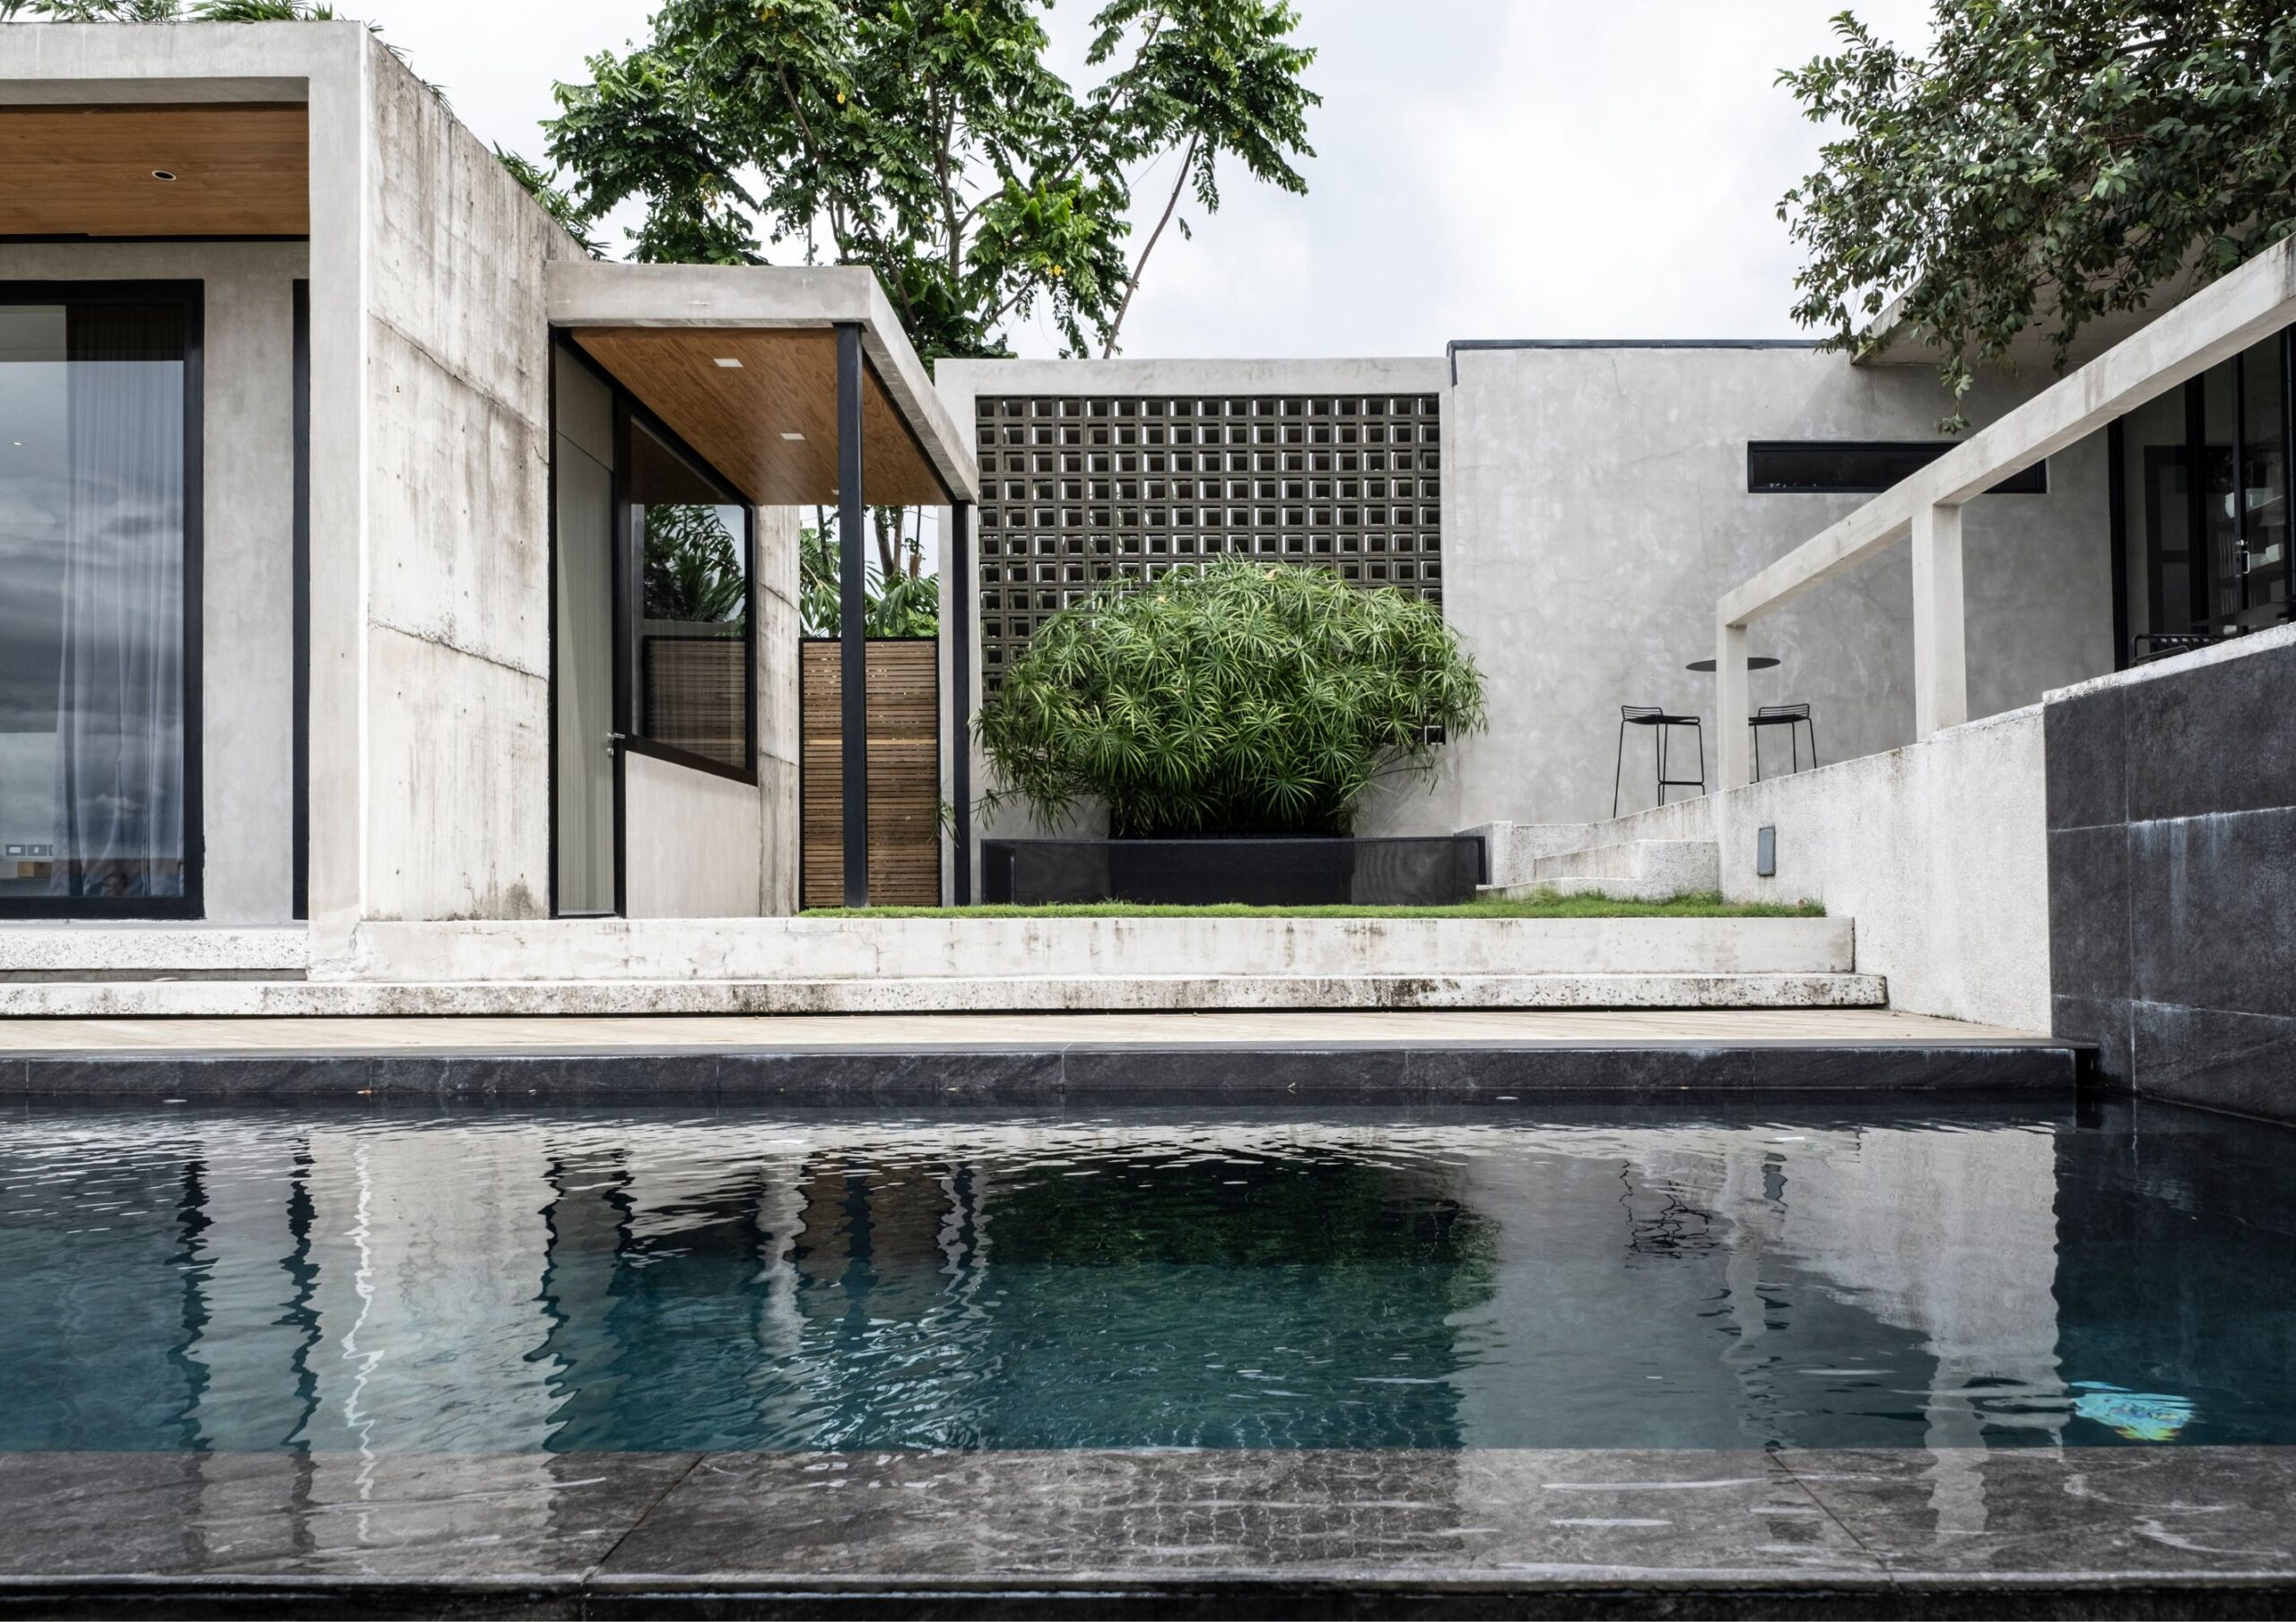 An infinity pool at Parallel, with an open courtyard made of concrete in Tanauan, Batangas.